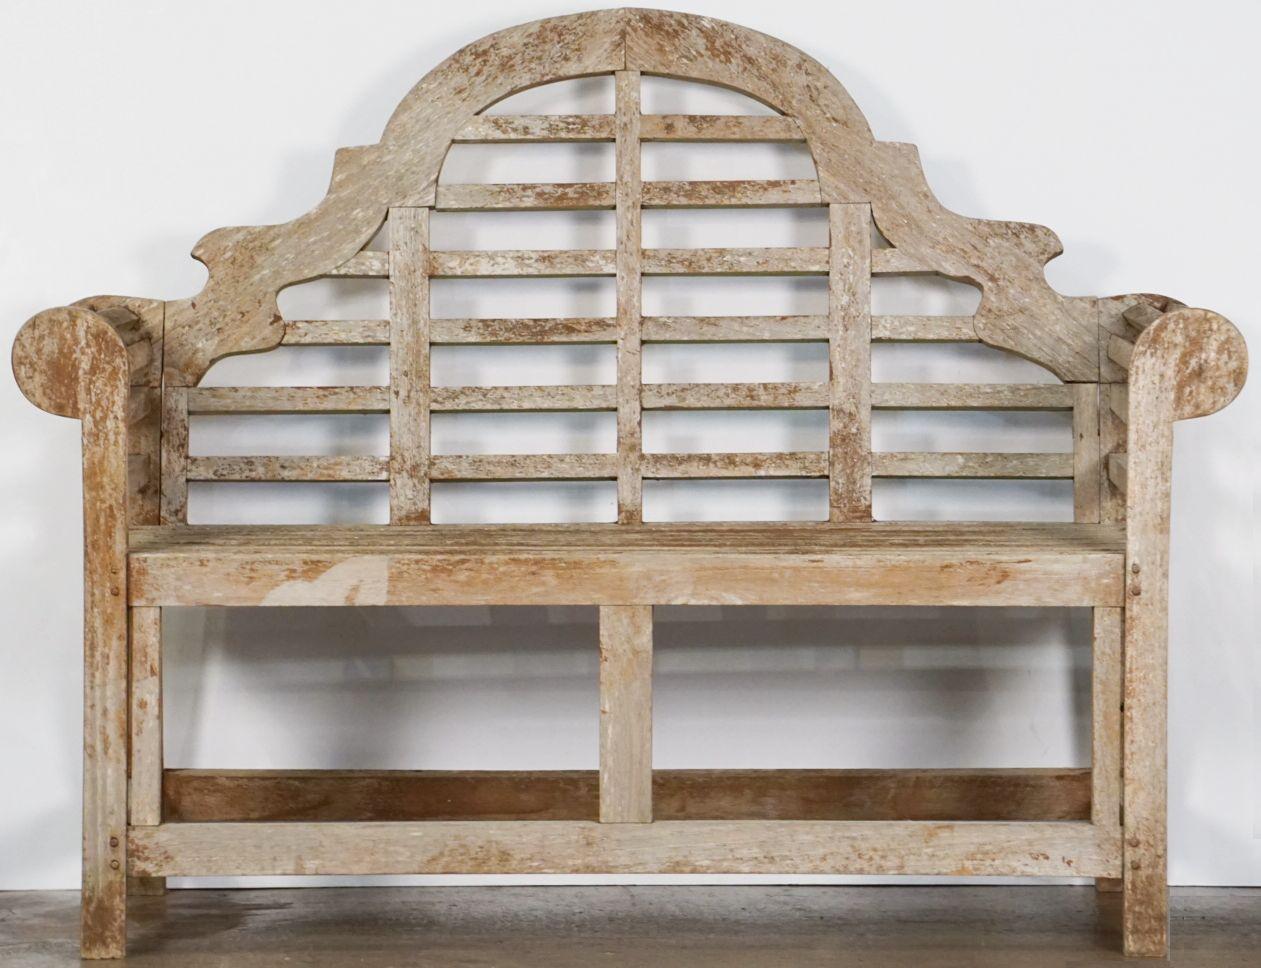 A fine vintage Lutyens style teak English garden bench after Sir Edwin Lutyens, the British architect renowned for his imaginative, classic designs throughout England, Ireland, and New Delhi (India).

Featuring a high-arched back for comfort and